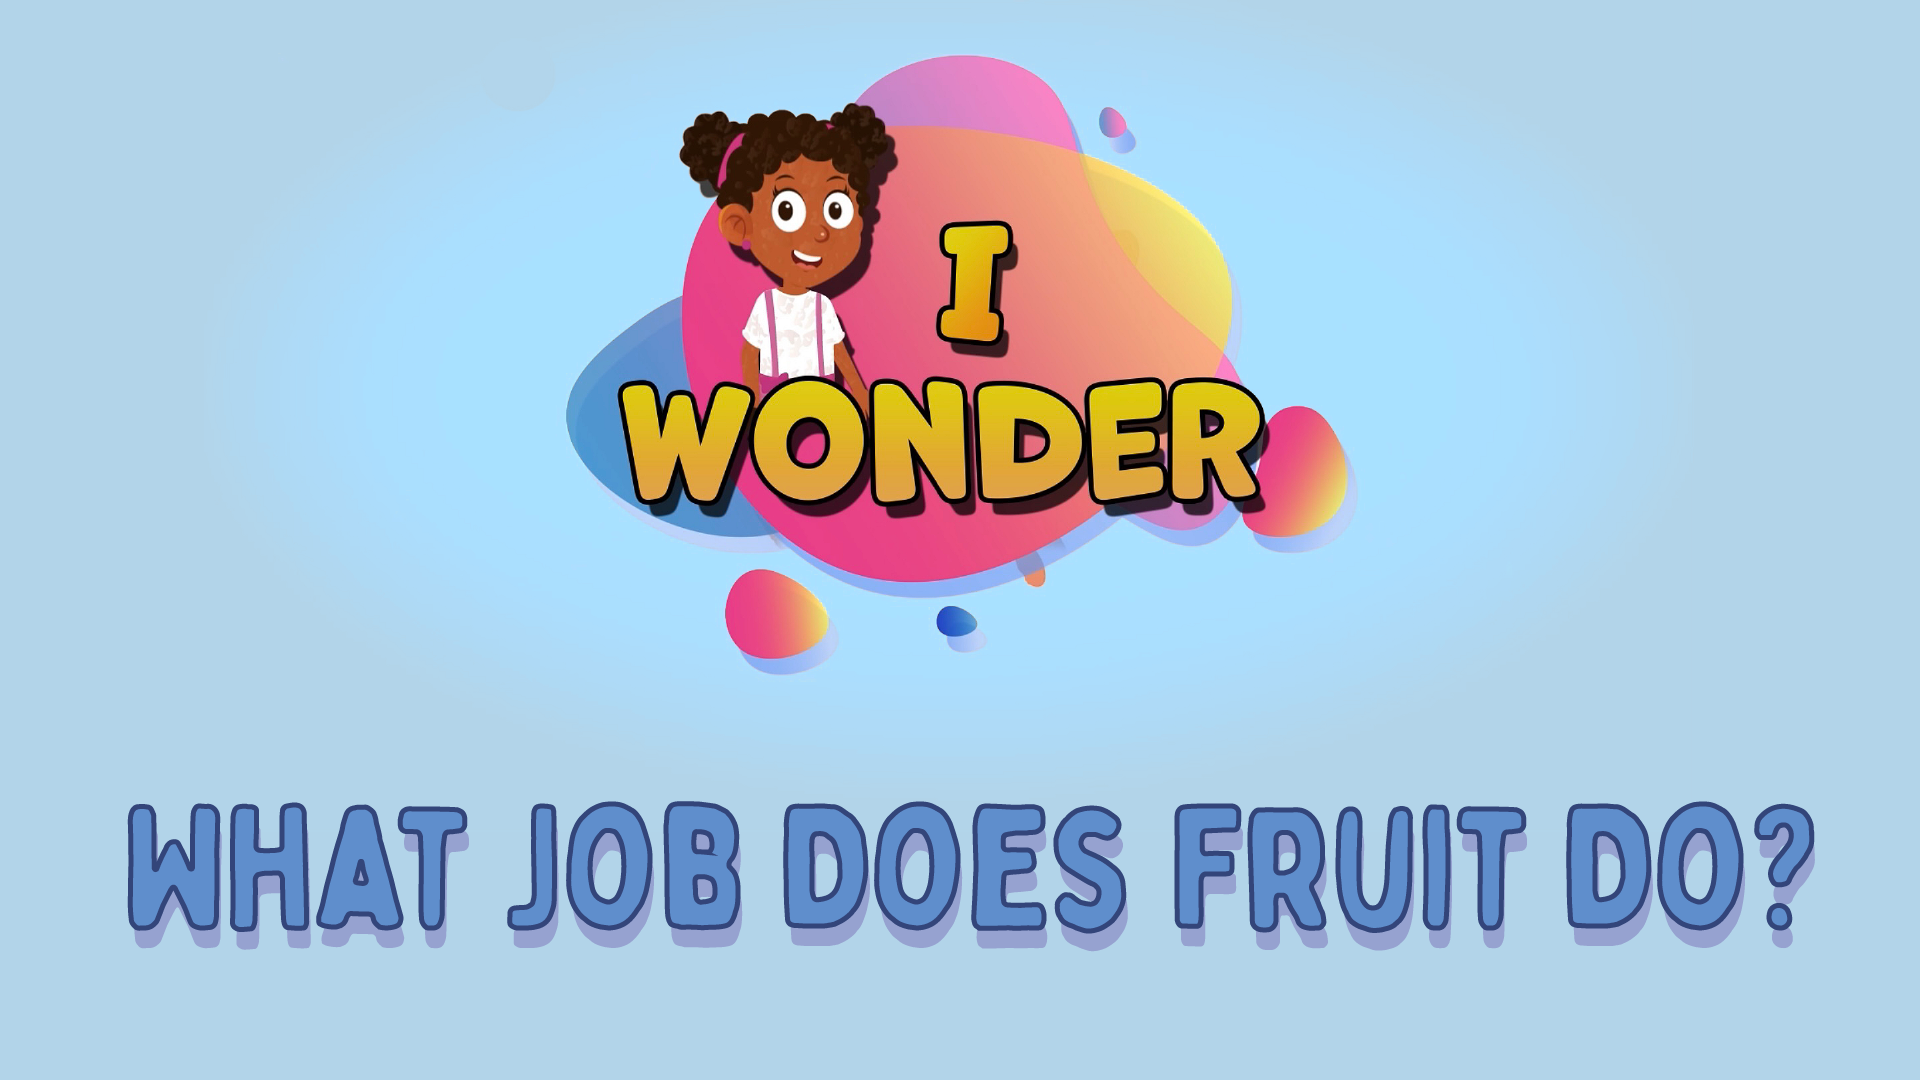 What Job Does Fruit Do?